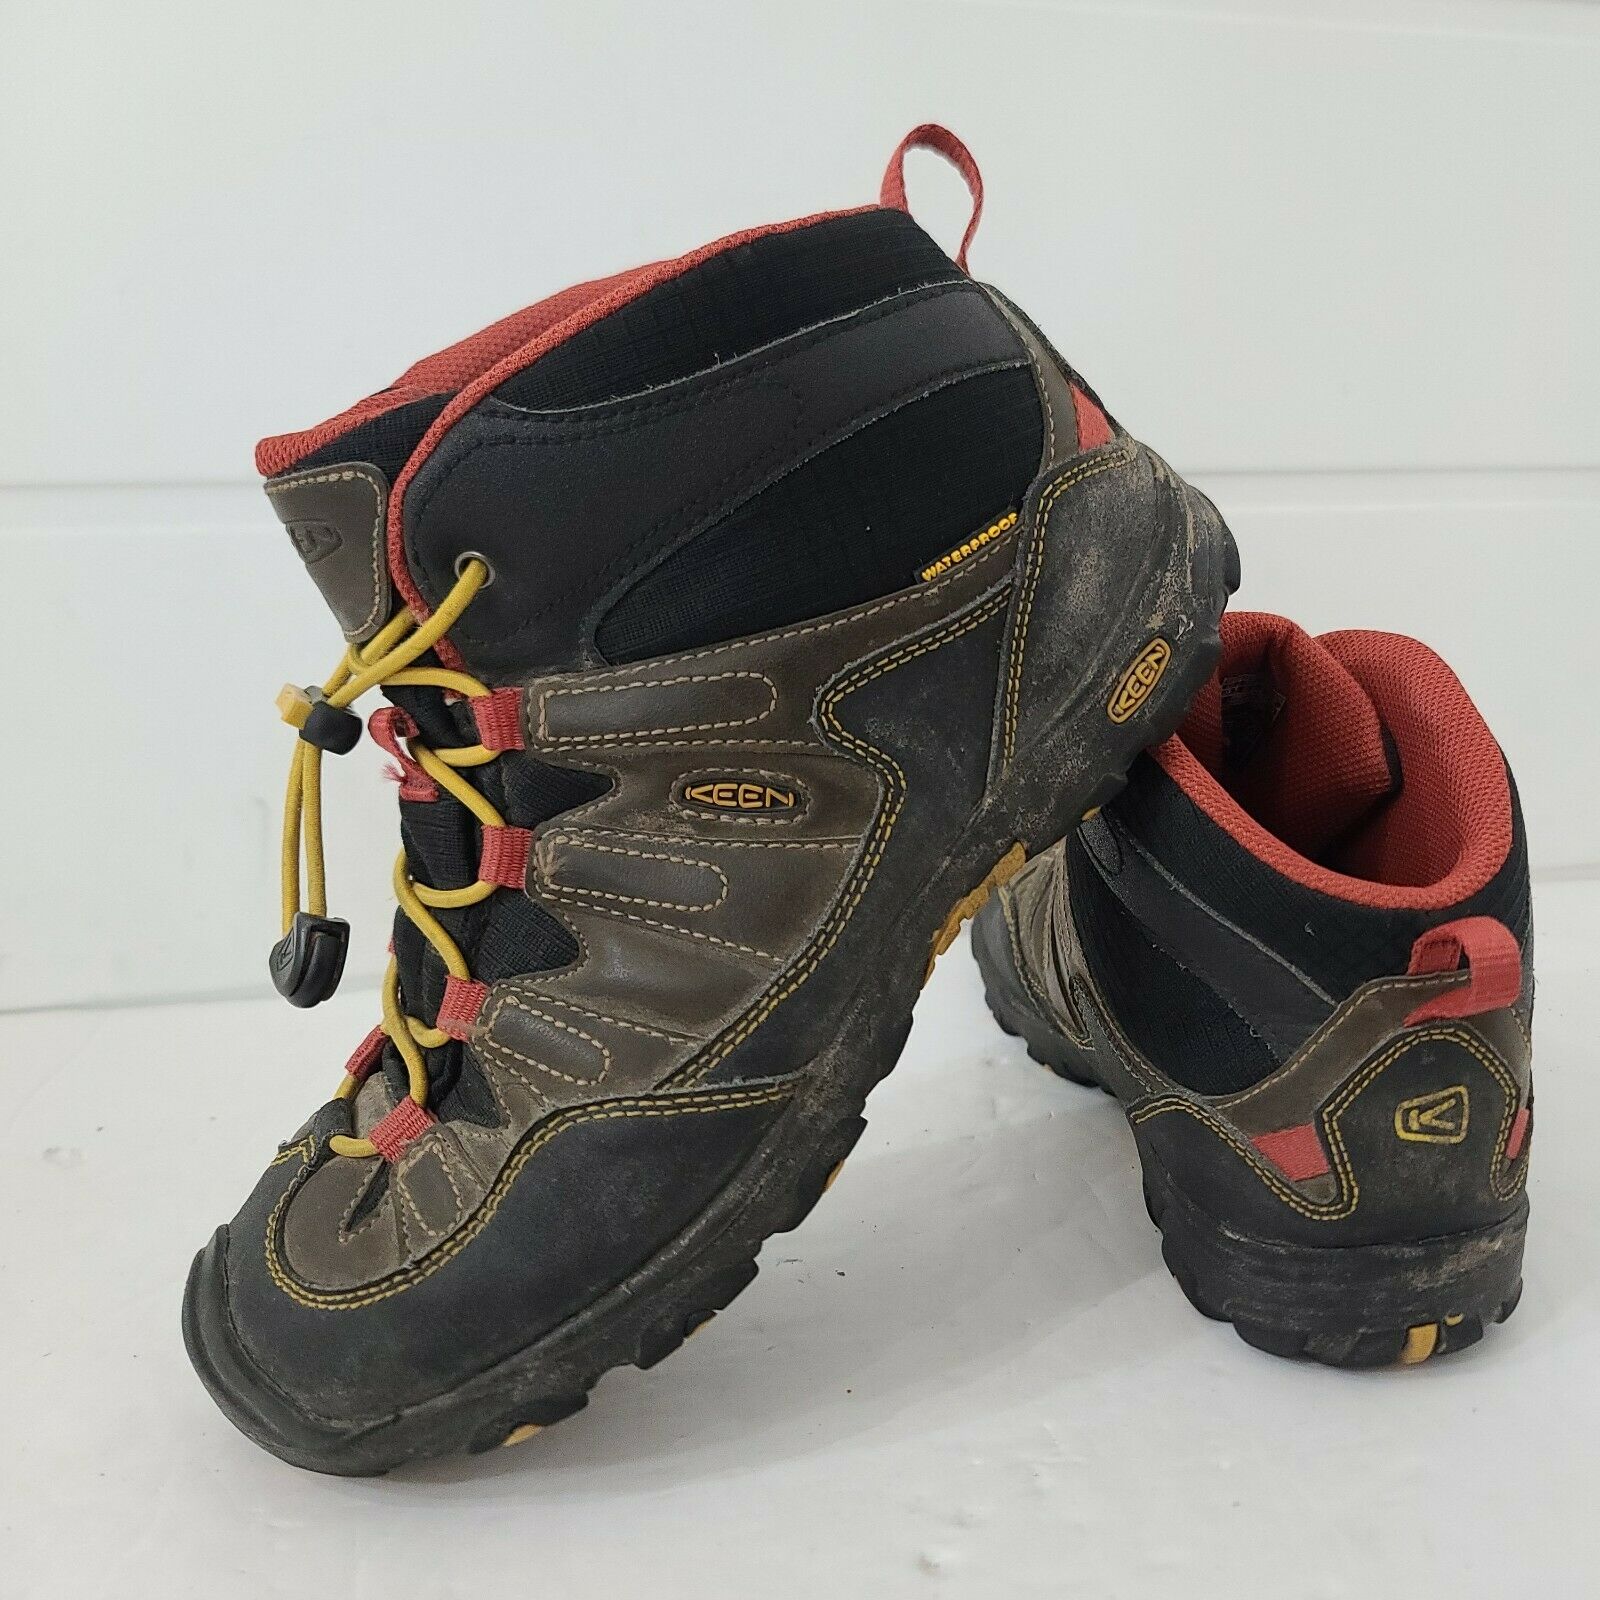 Keen Pagosa Mid Waterproof Hiking Boots Men's/Boys Size 6 Brown Bungee Lace